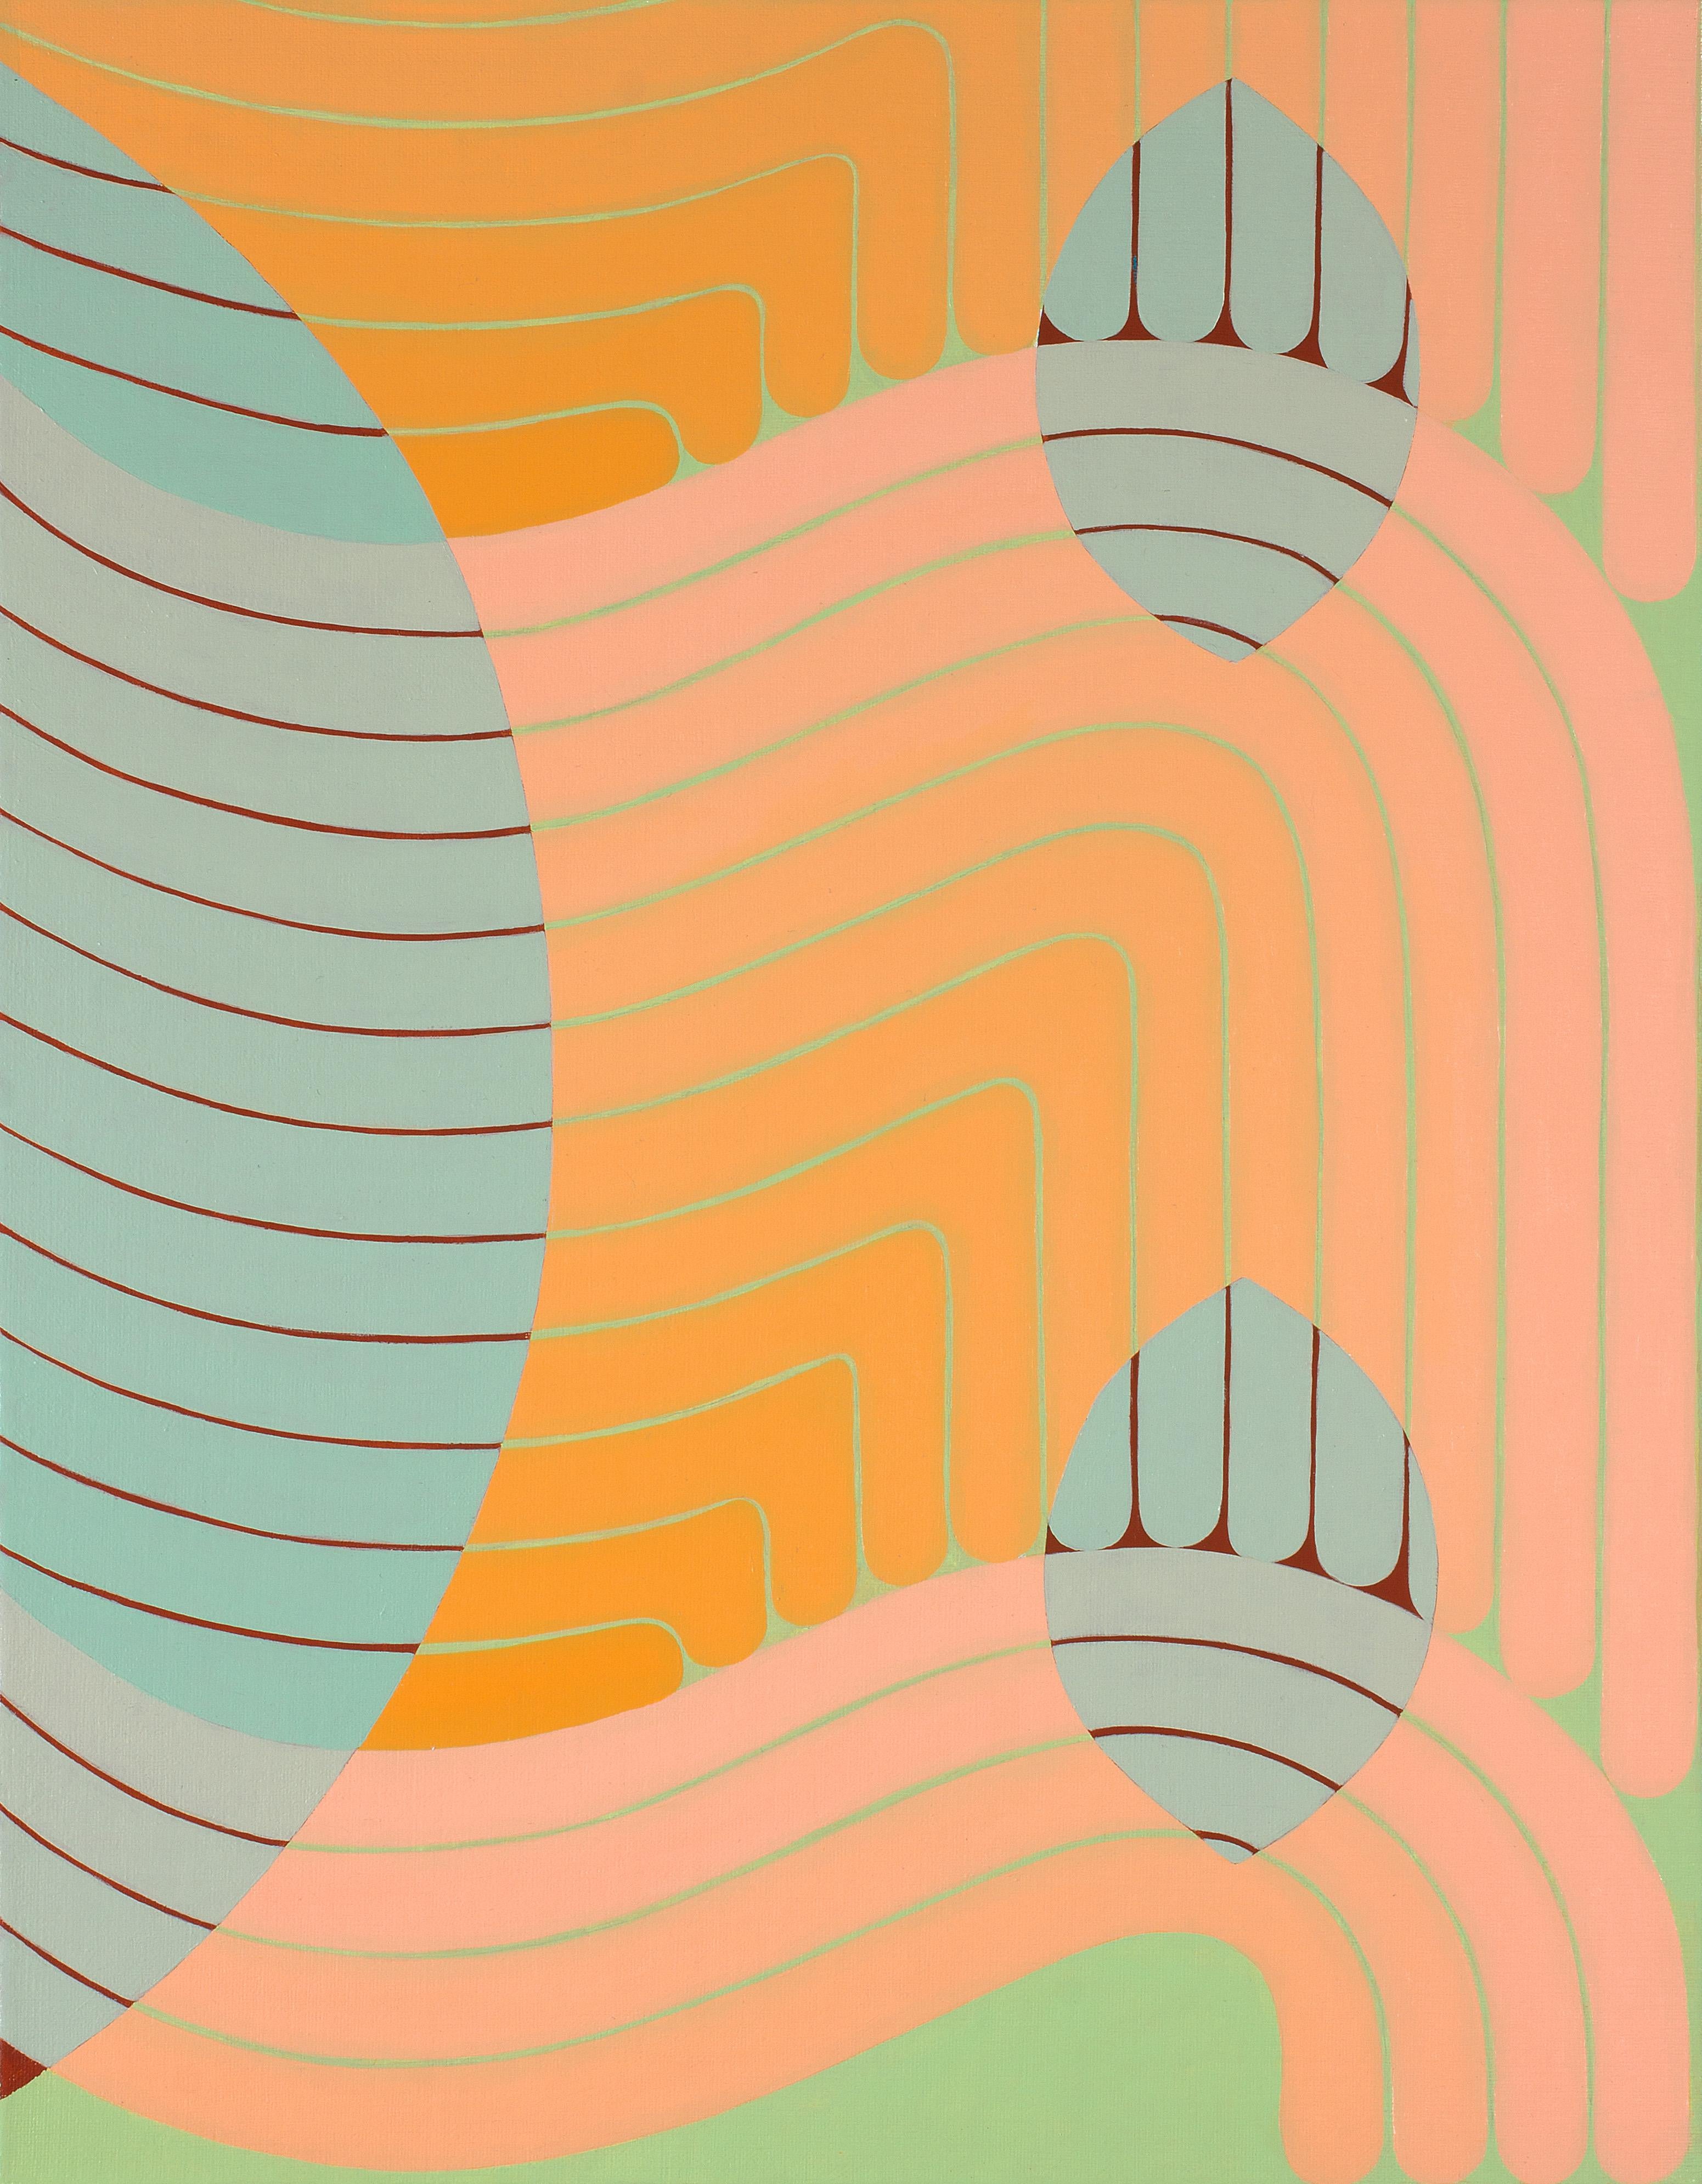 An abstract geometric pattern is composed of thick curving lines in peachy pink and pale pinkish orange, bright and luminous against a pale mint green background. A semicircle and two almond shapes in light blue outlined in thin, dark burgundy red